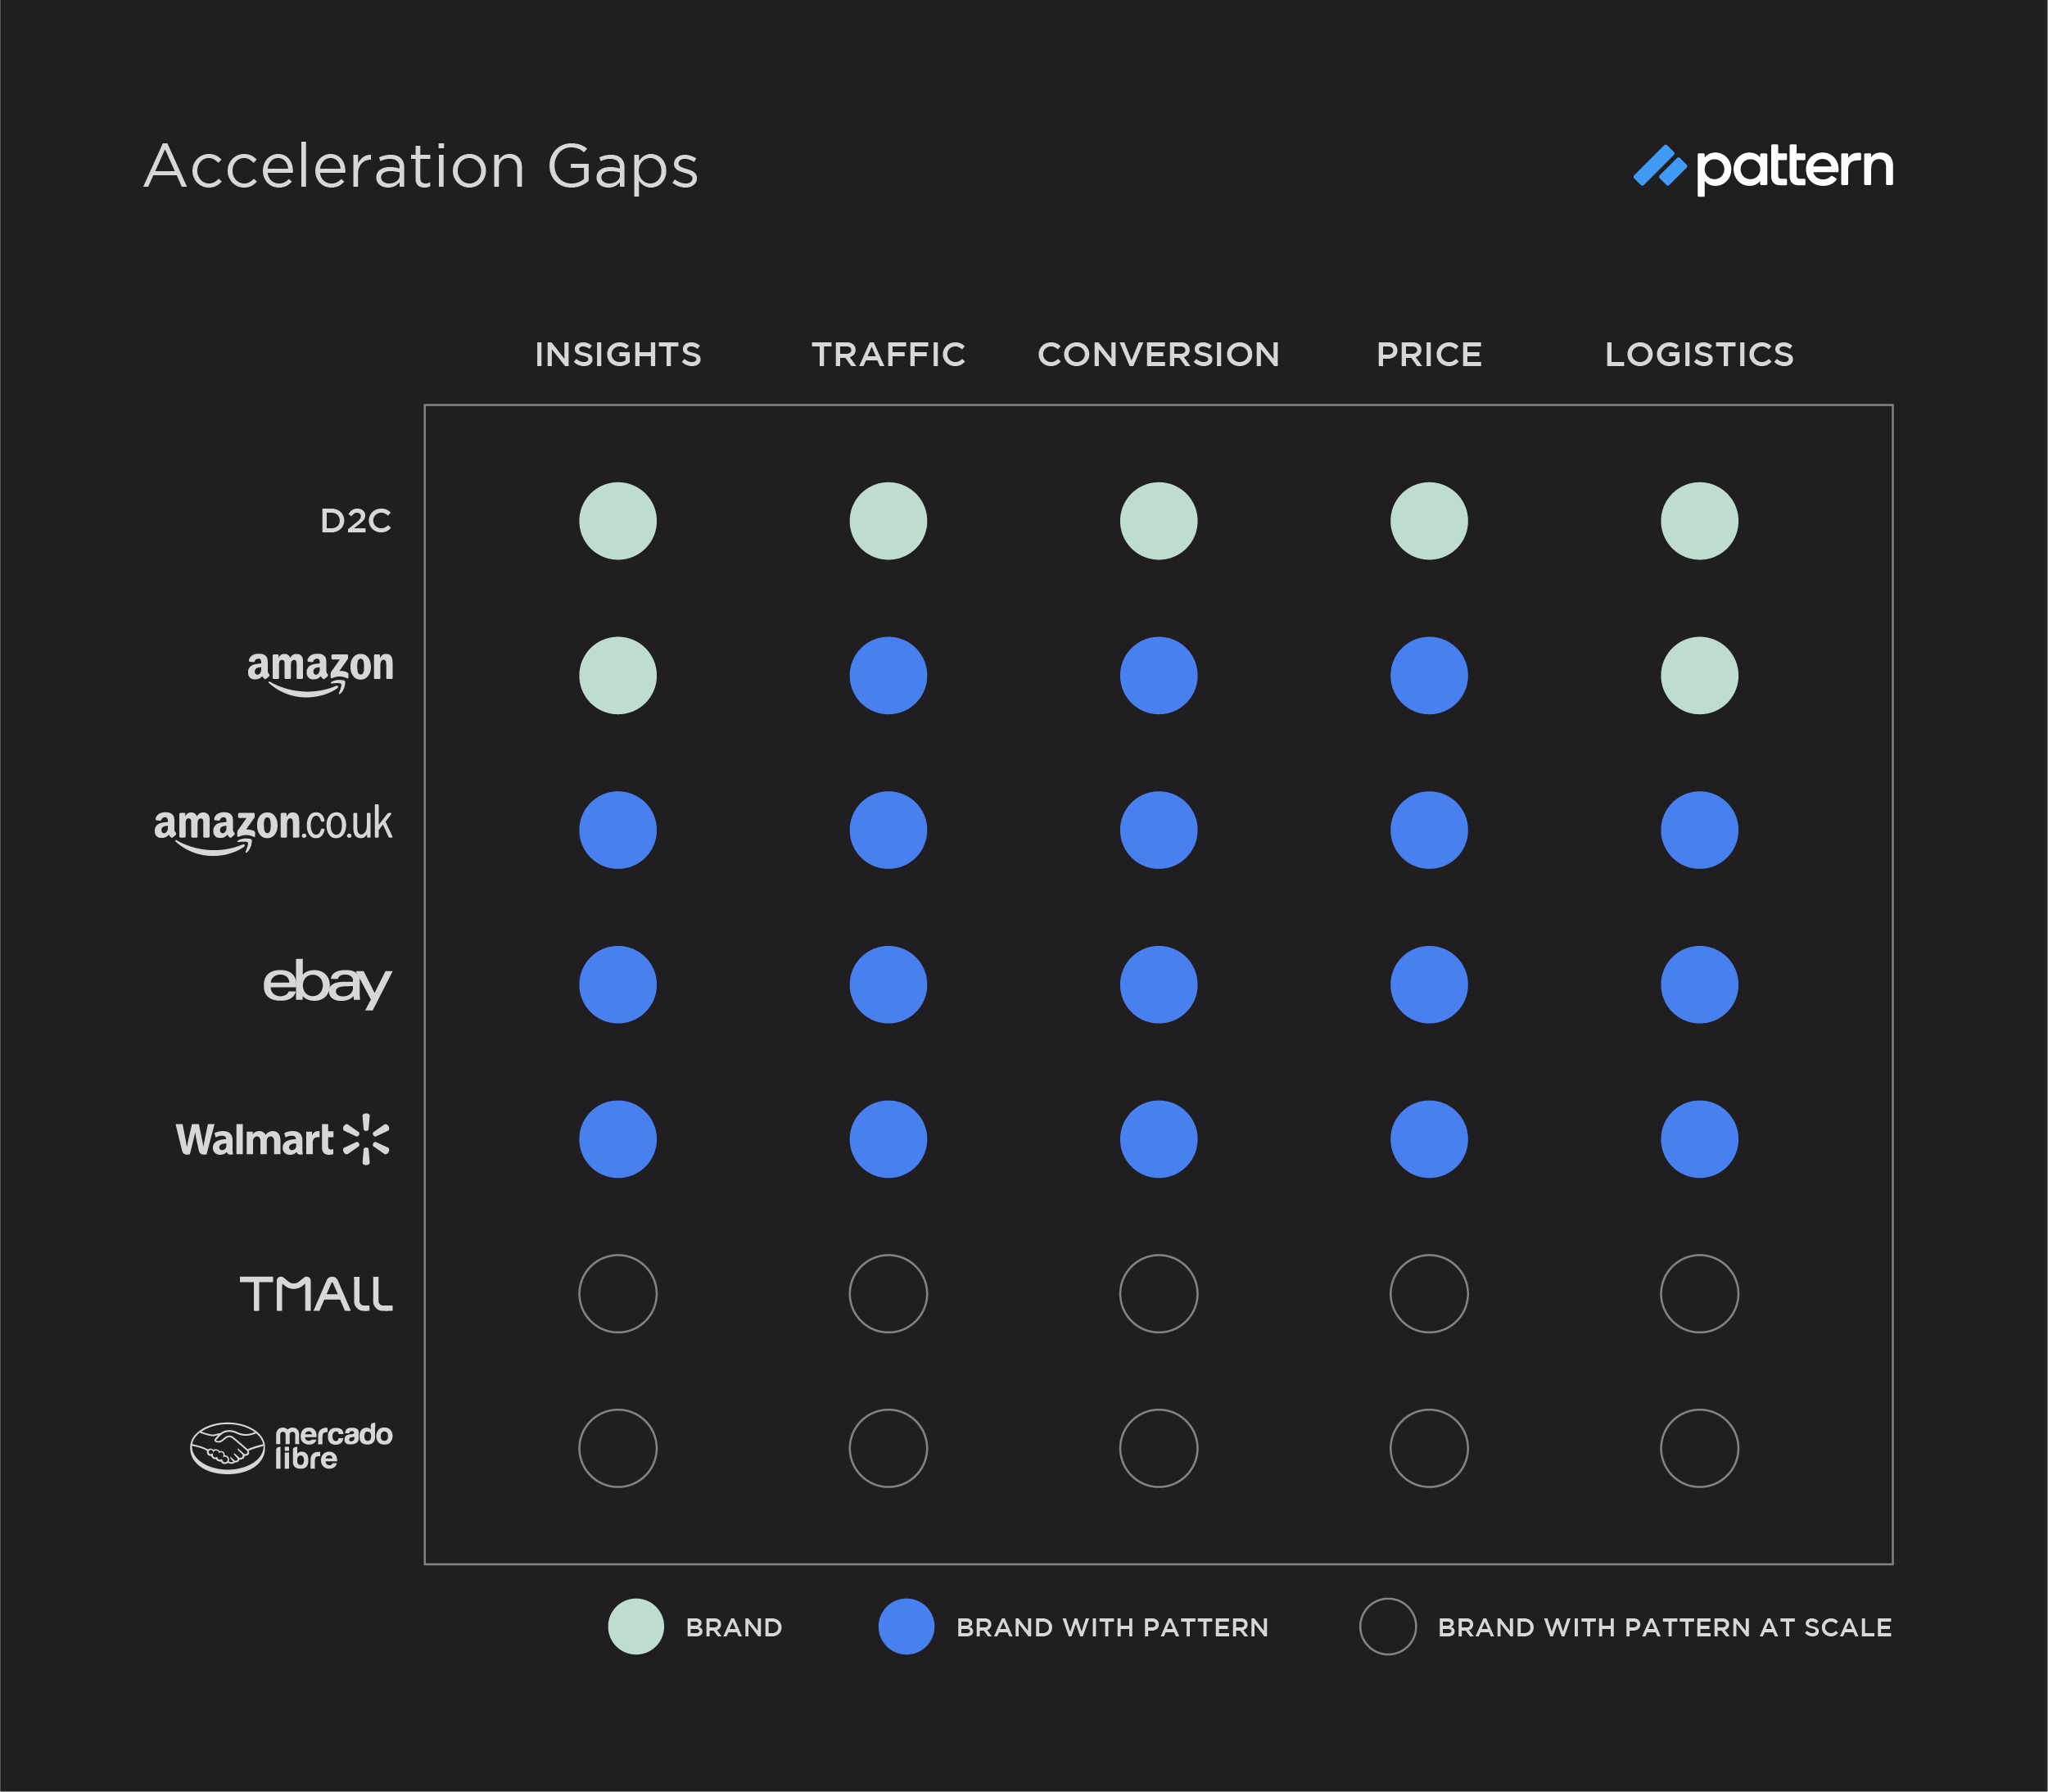 Acceleration Gaps After Pattern - New